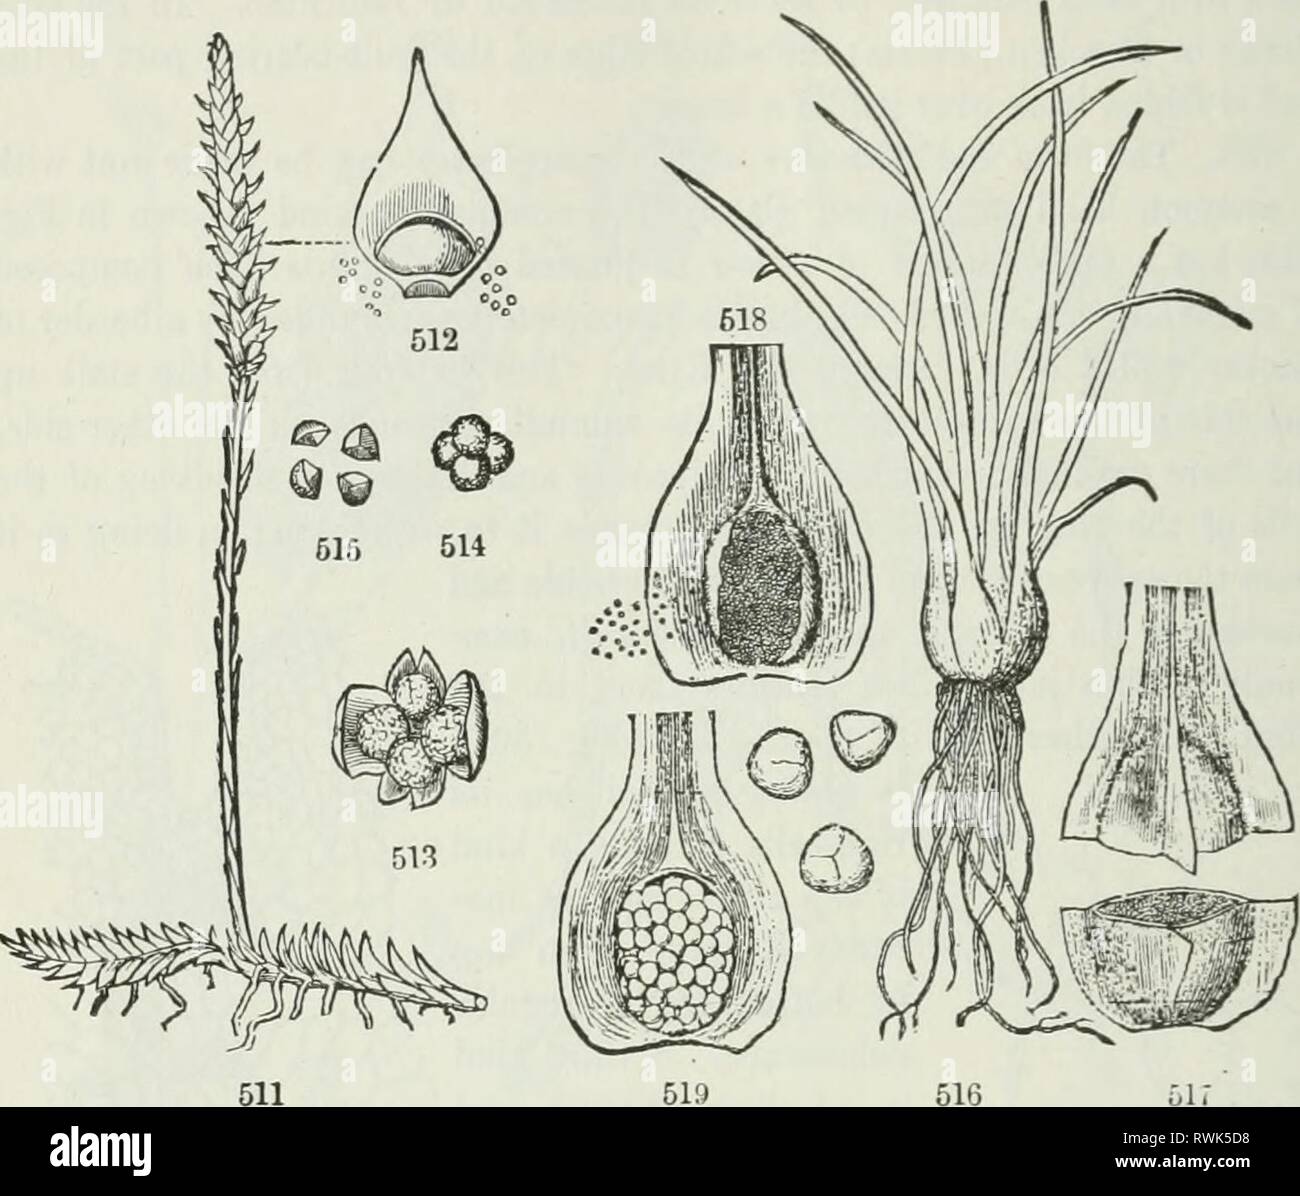 The elements of botany for The elements of botany for beginners and for schools elementsbotany00gray Year: 1887  160 CRYPTOGAMOUS OR FLOWERLESS PLANTS. [SECTION 17. closely resembles a small Liverwort. This is named a Prothallus (Fig. 509): from some point of this a bud appears to originate, which produces the first fern-leaf, soon followed by a second and third, and so the stem and leaves of the plant are set up. 490. Investigation of tliis prothallus under the microscope resulted in the discovery of a wholly unsuspected kind of fertilization, takin? place at    this germinating stage of the  Stock Photo